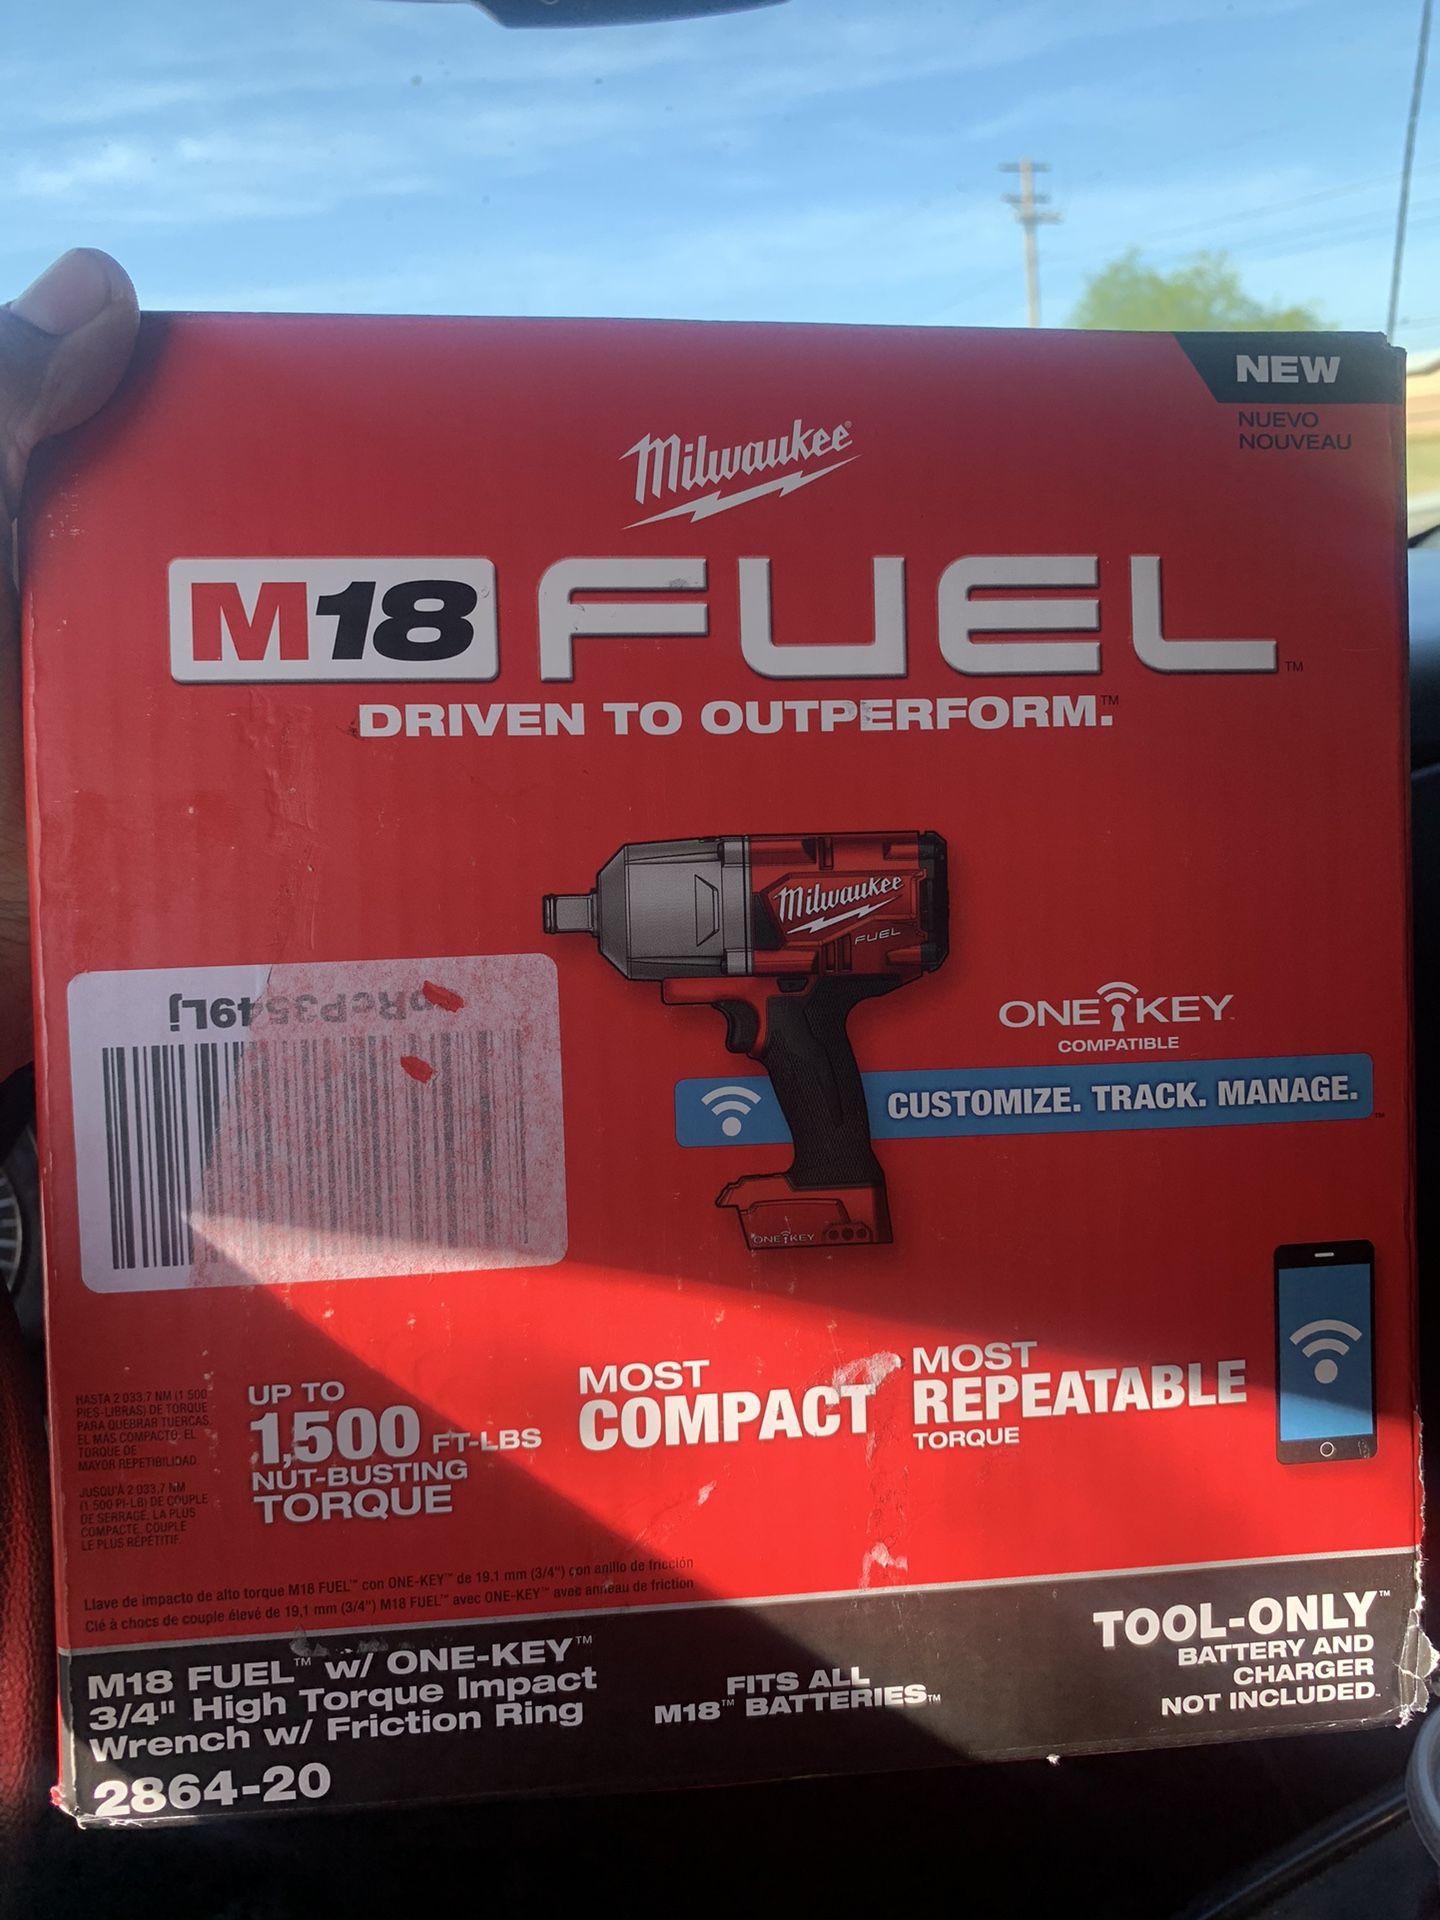 2864-20 mMilwaukee M18 Fuel W/one-Key High Torque Impact Wrench 3/4 In. Friction Ring